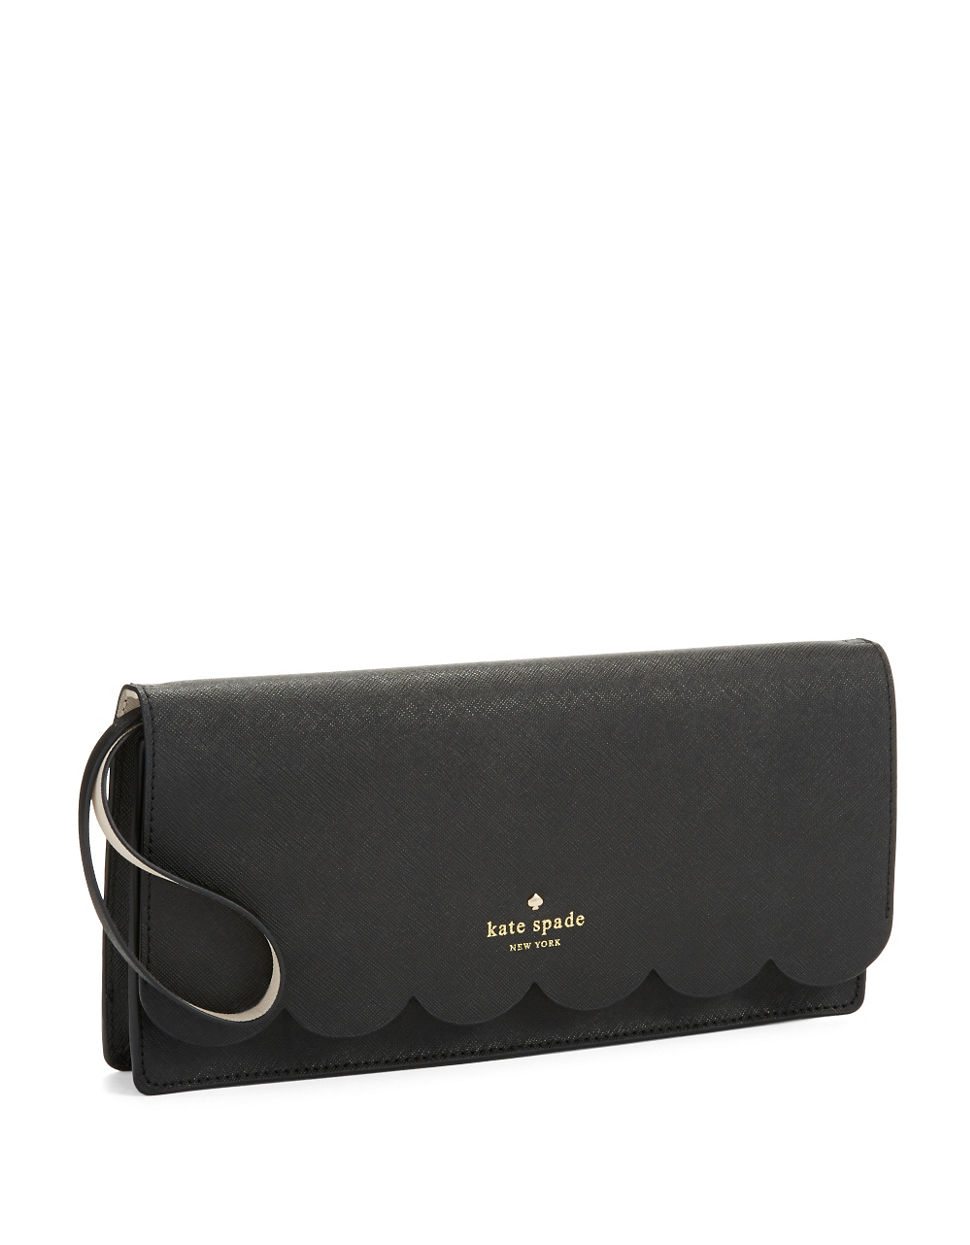 Kate spade new york Kiki Convertible Leather Clutch in Black | Lyst